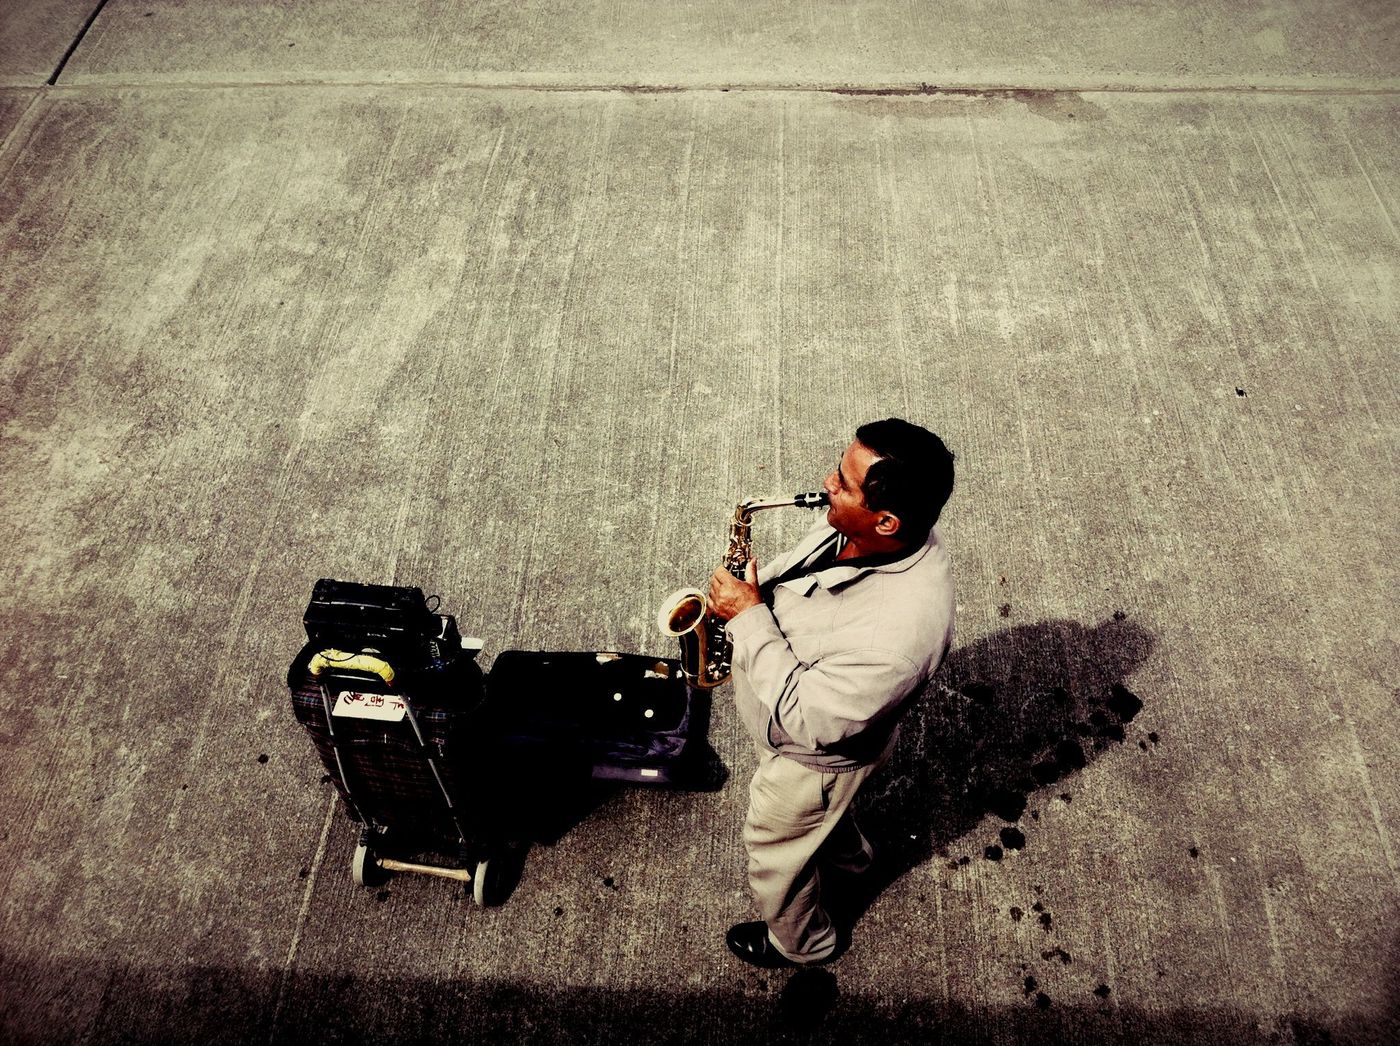 A man playing in the street